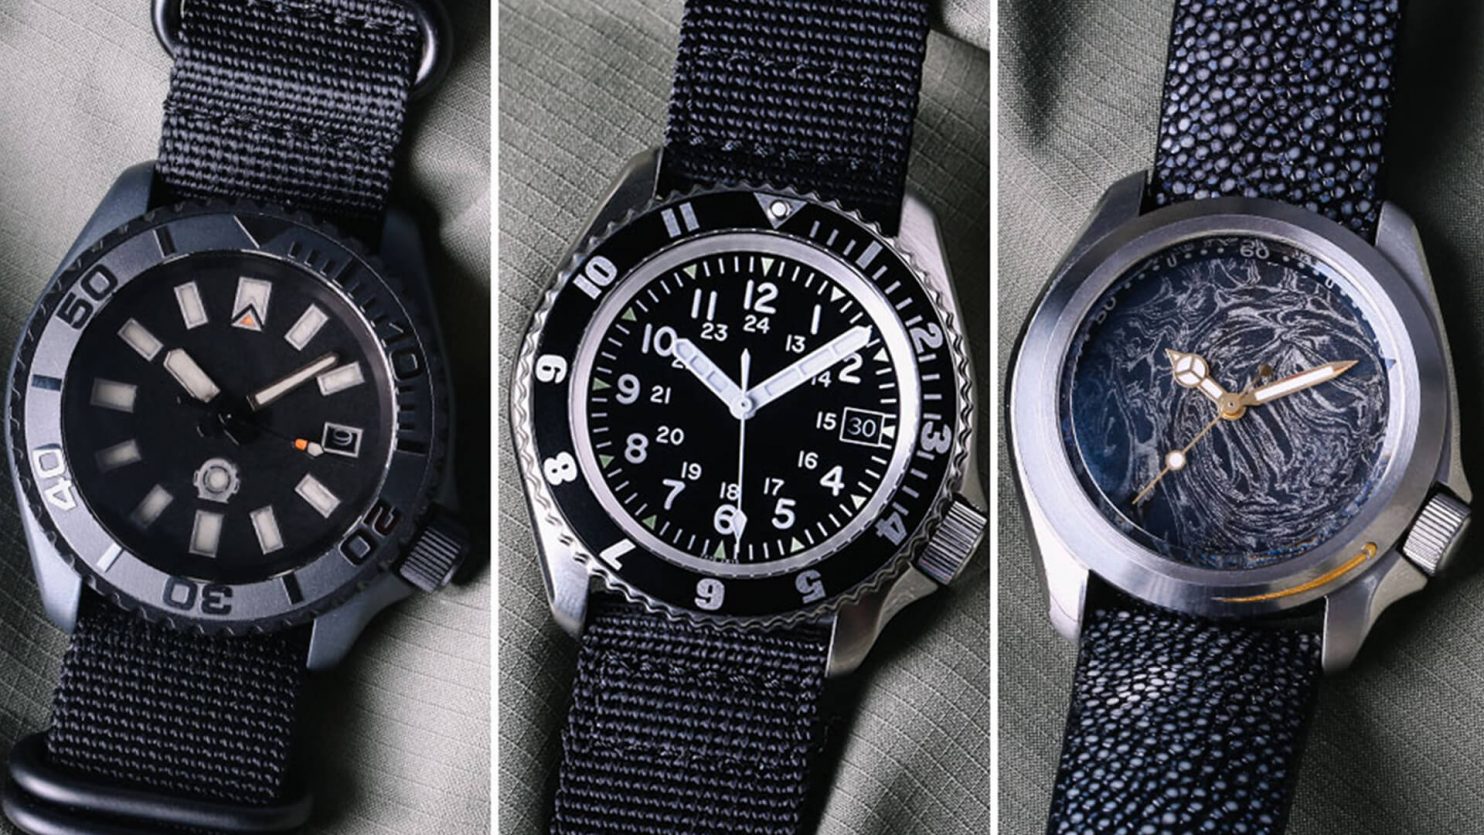 The Beginner’s Guide to Modding a Seiko Watch